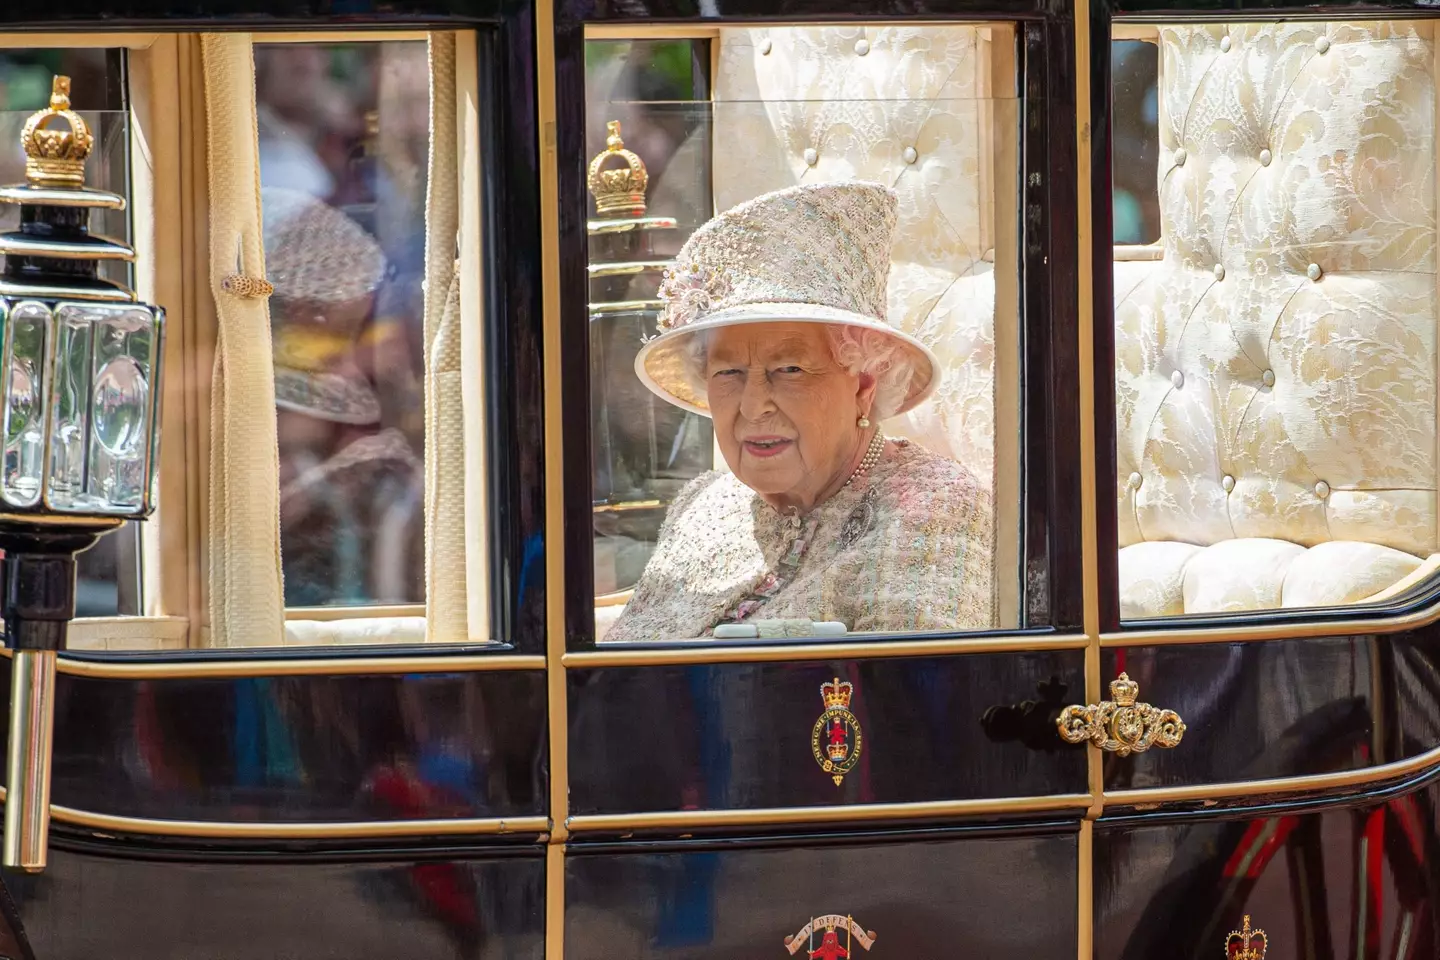 The Queen at Trooping the Colour in 2019.